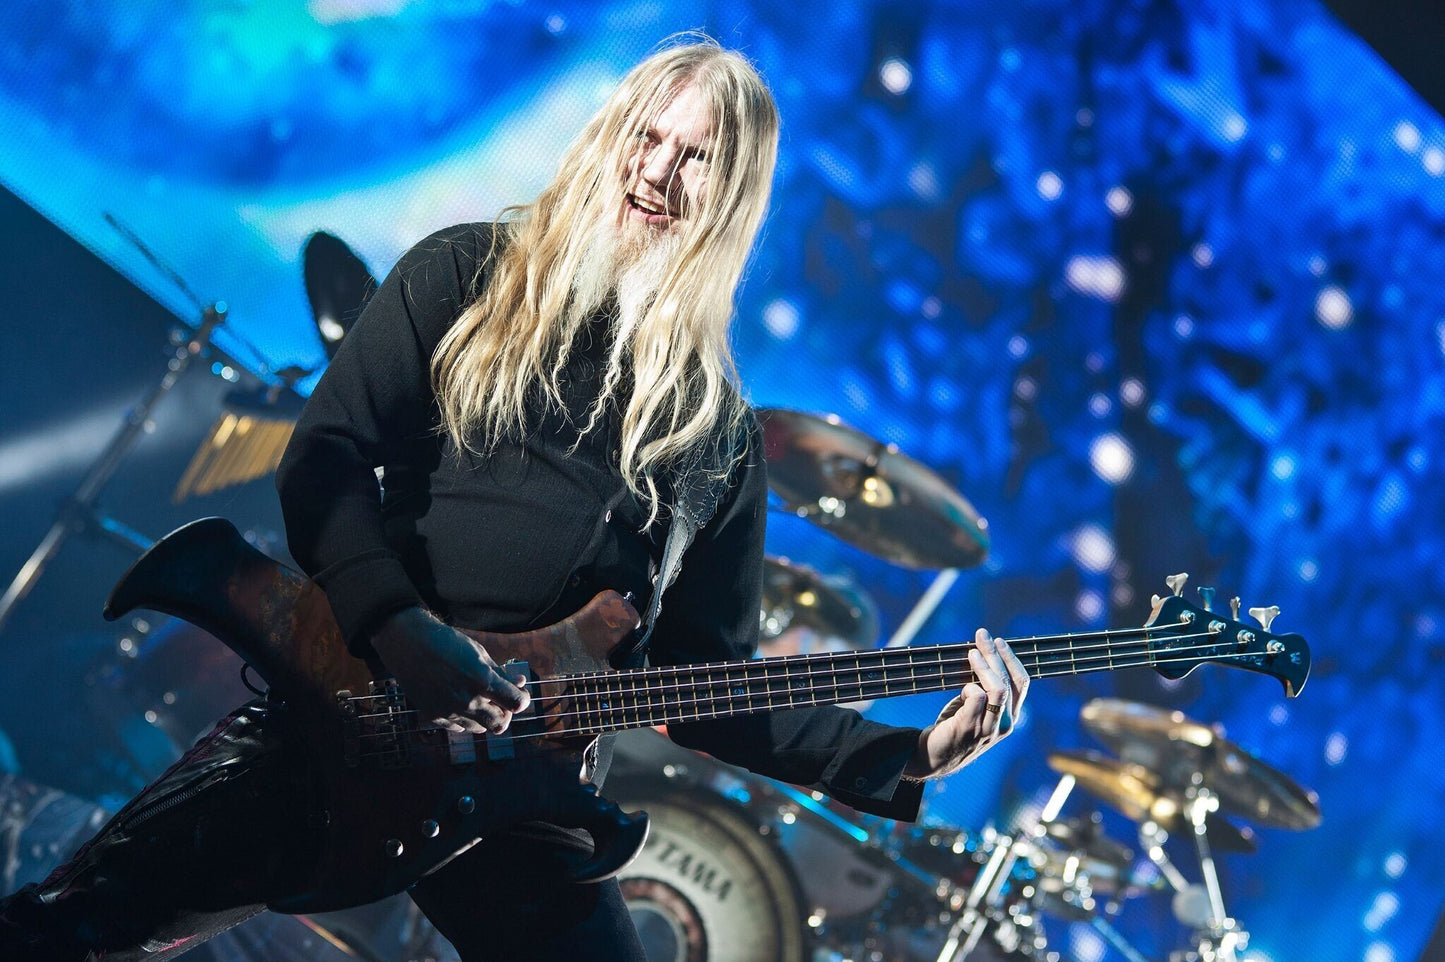 Nightwish - Marco Hietala Rocking His Bass on Stage with Projection Backdrop, Switzerland - Poster (2/2)